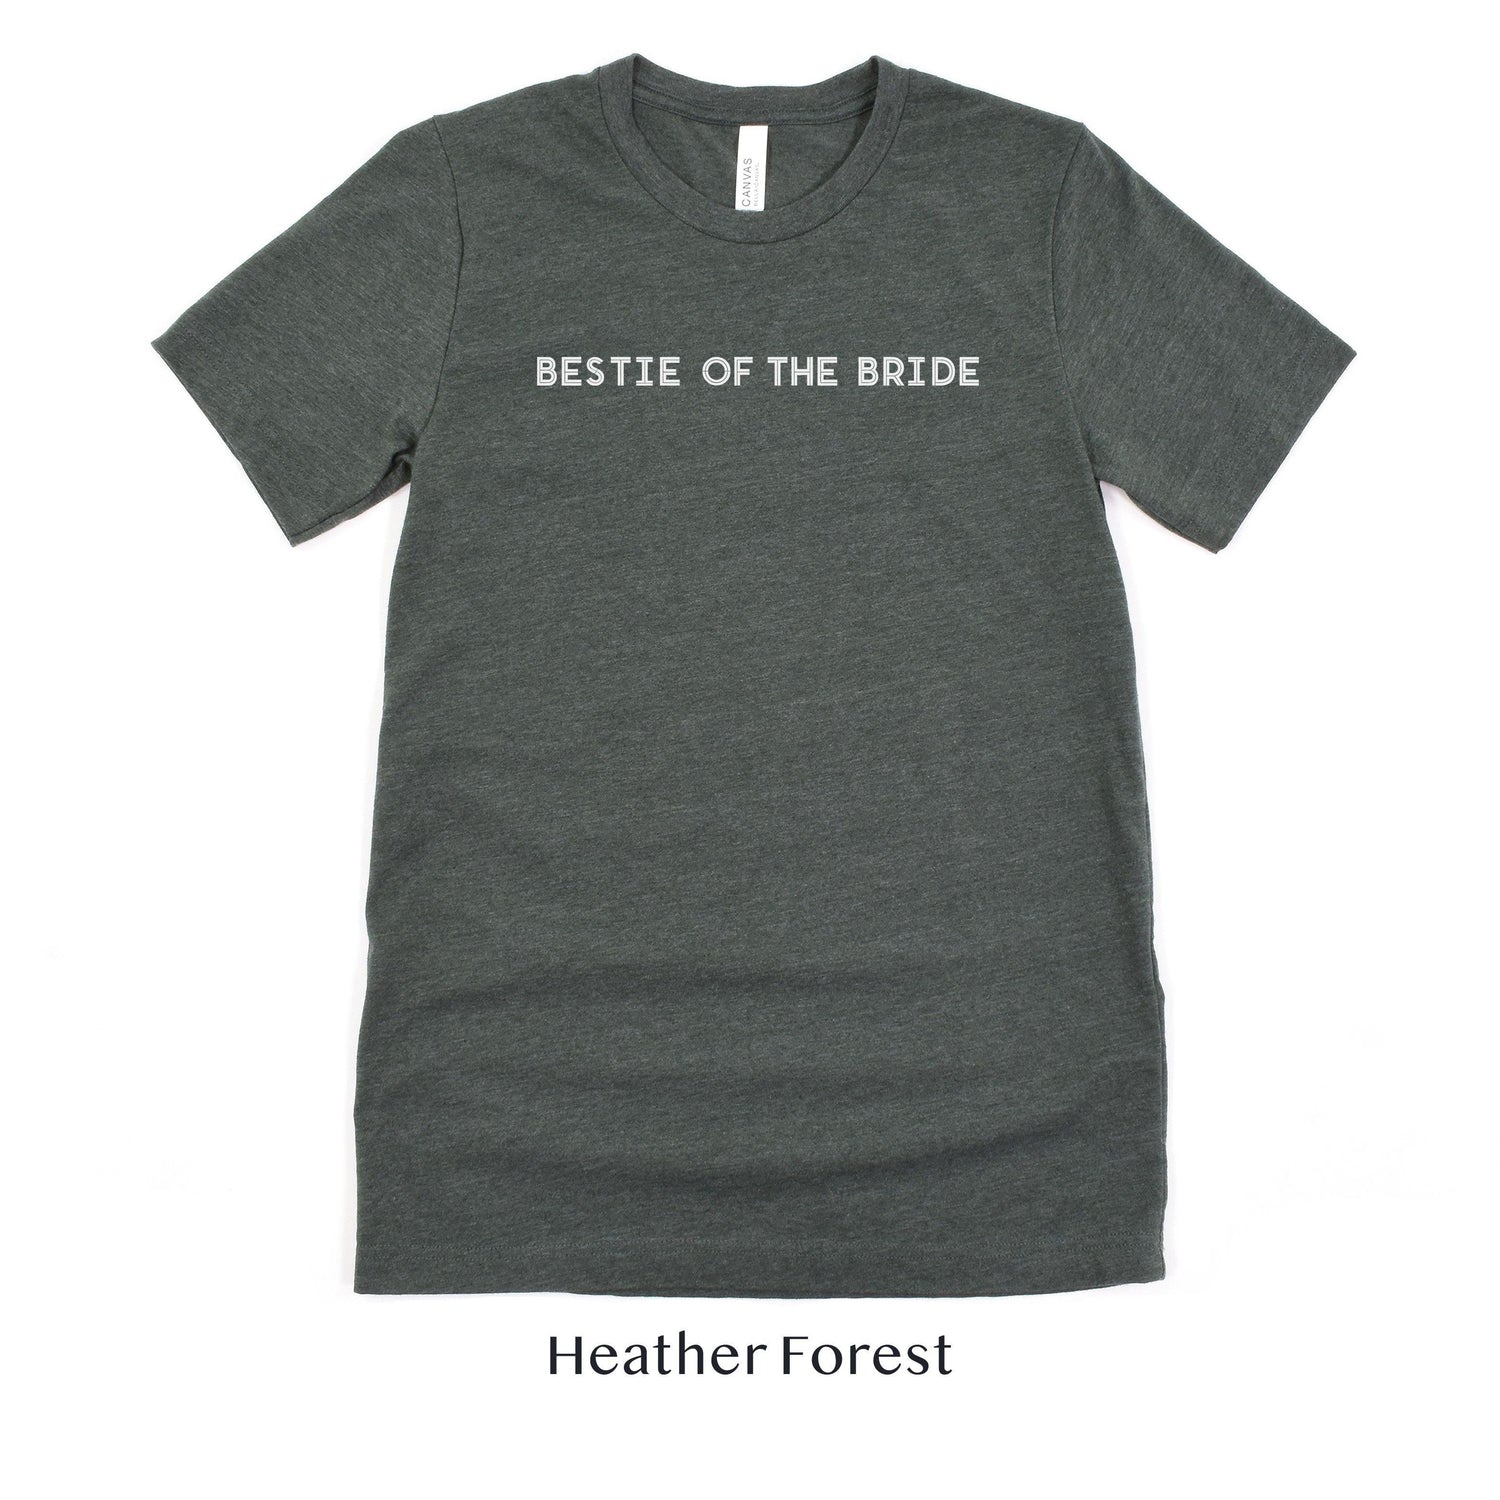 Bestie of the Bride Shirt - Matching Wedding Party Tshirts - Unisex t-shirt by Oaklynn Lane - forest green tee